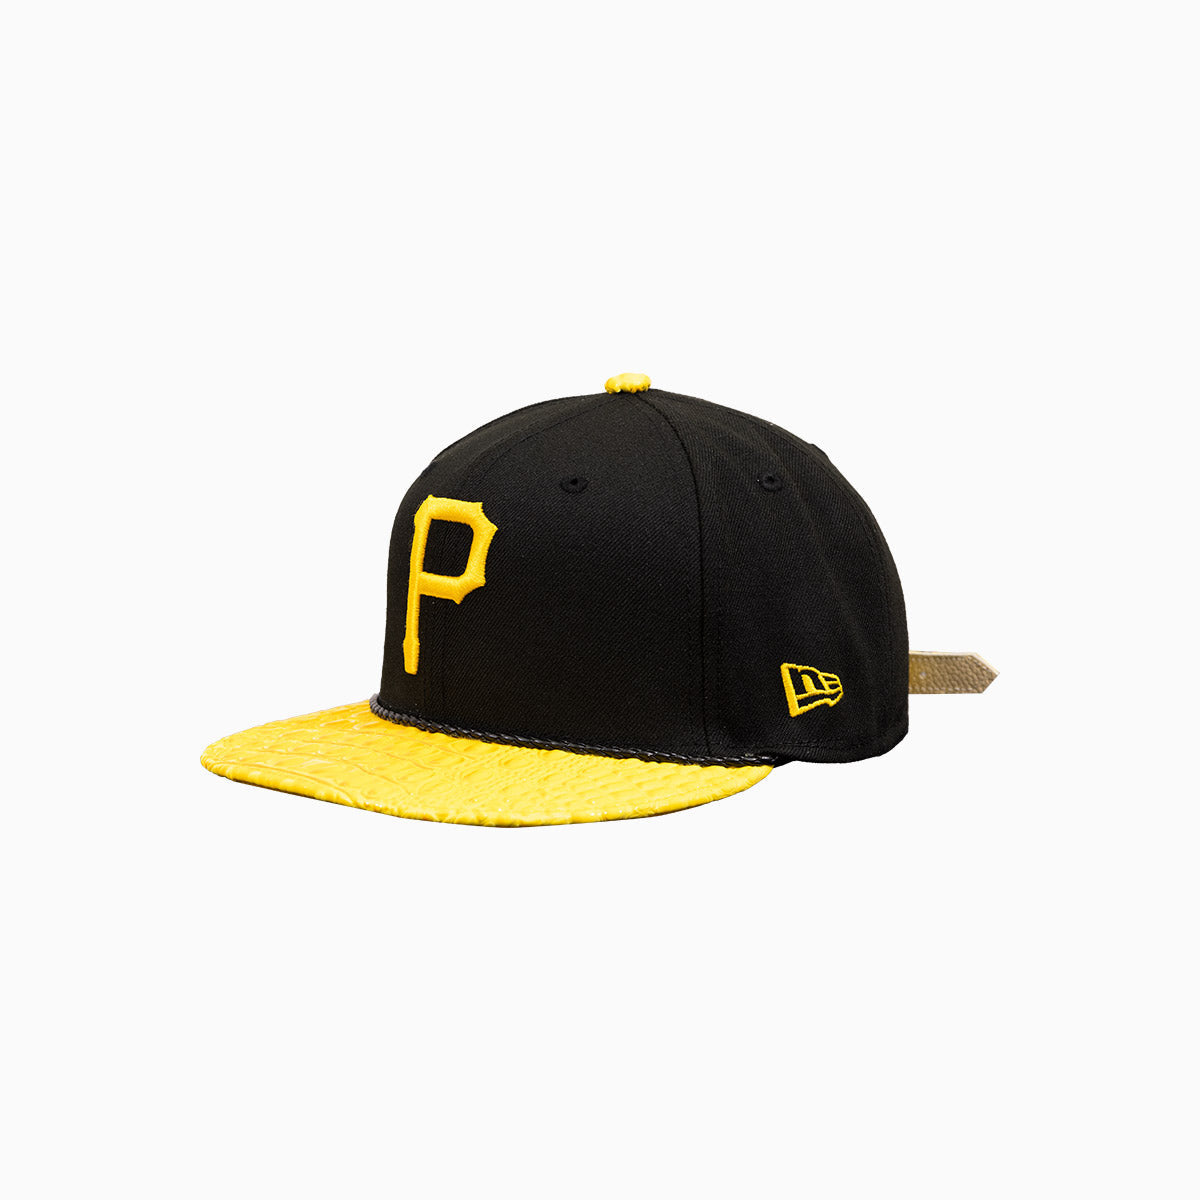 Breyer's Buck 50 Pittsburgh Pirates Hat With Leather Visor